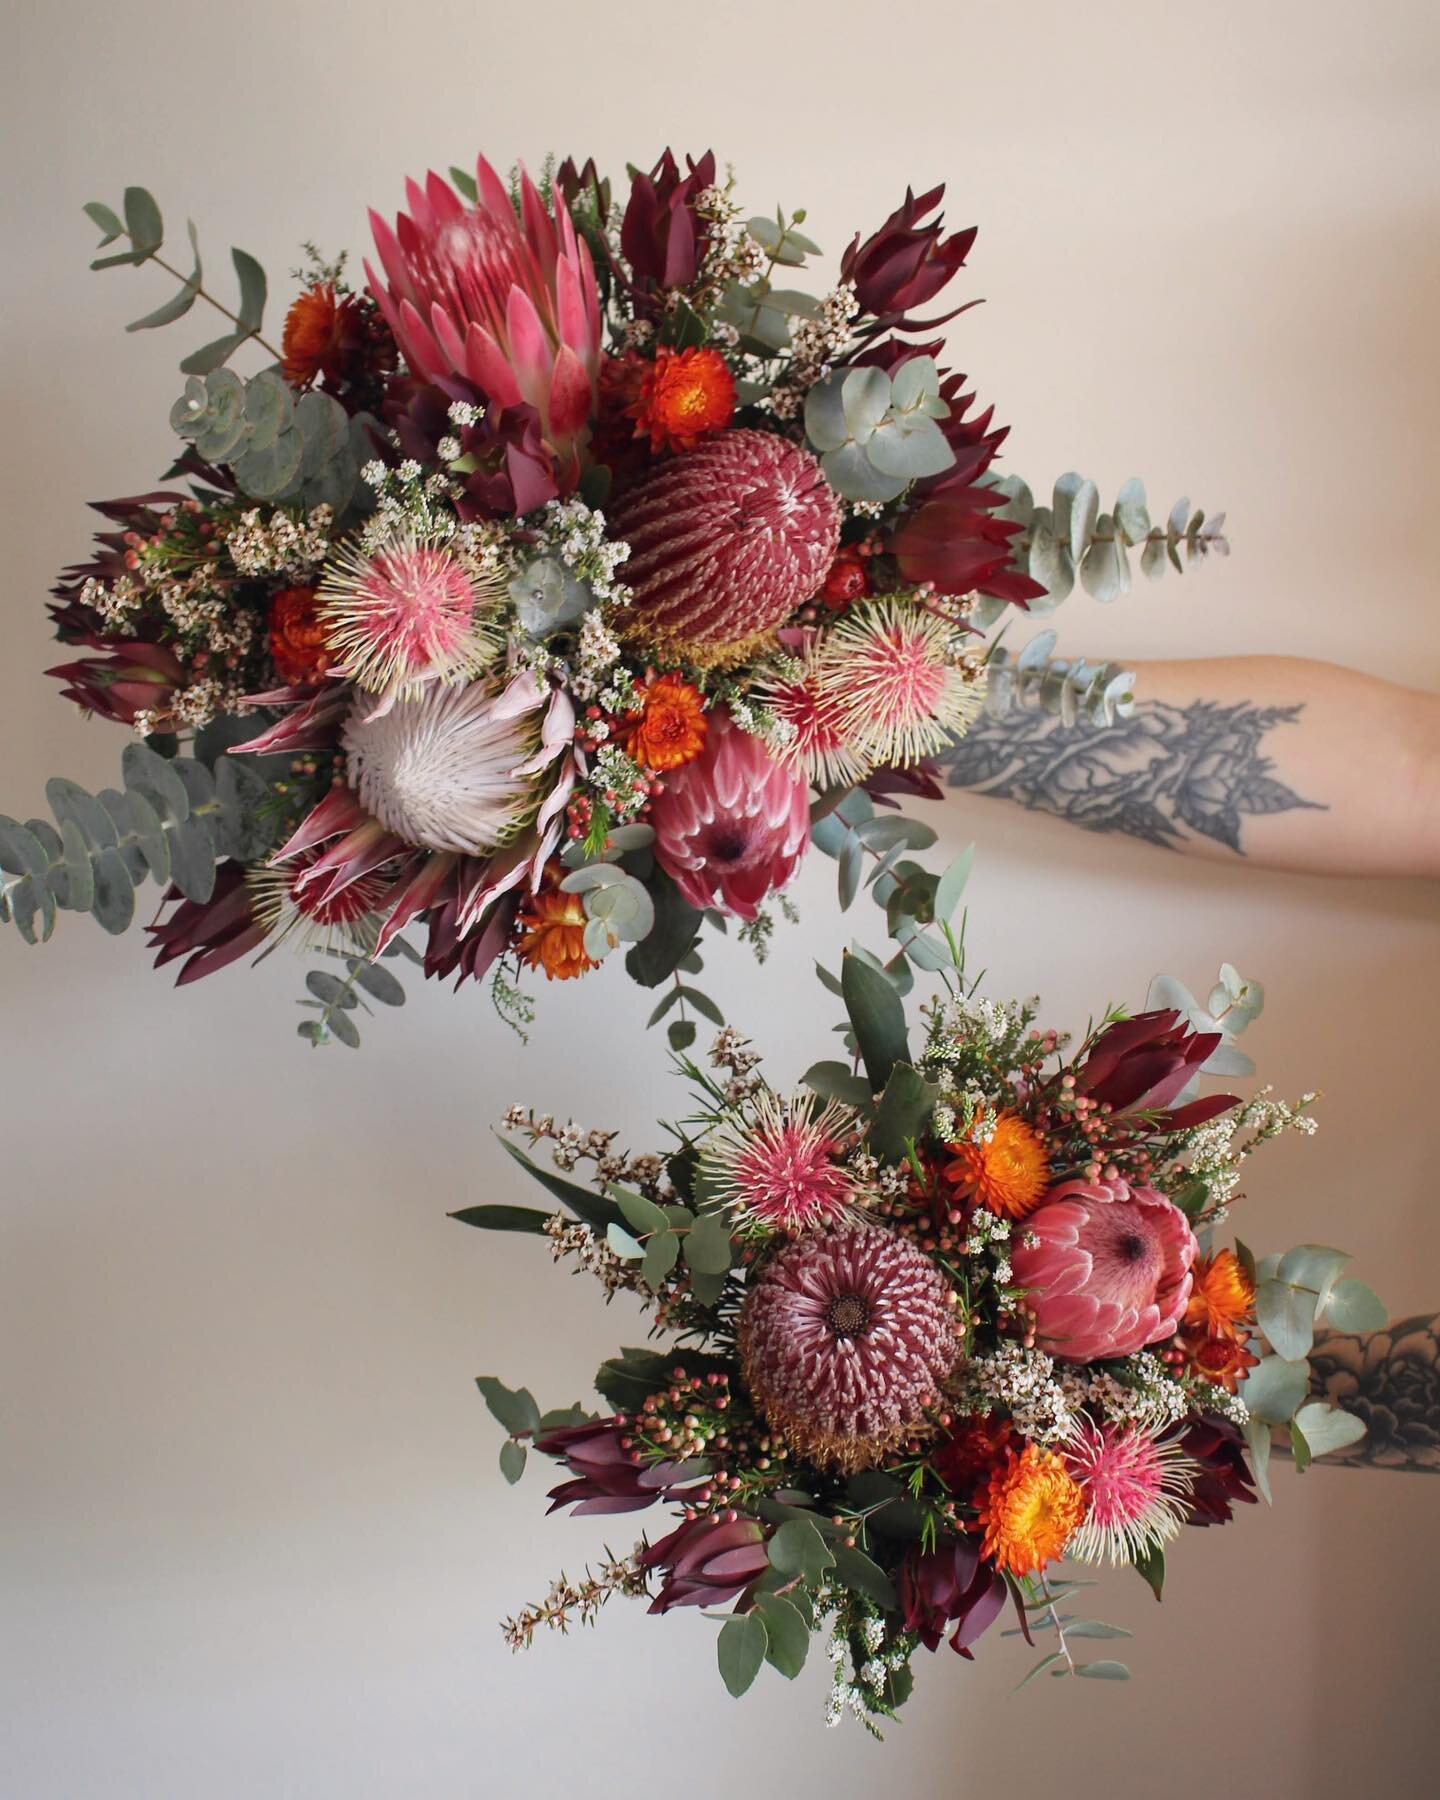 Renae &amp; Matt ❤️&zwj;🔥

What a beautiful wedding to end our season! Proteas and rich, plum toned wildflowers with pops of fiery orange straw flowers. The local pincushion hakea blossoms were certainly the stars of the show 🌟

Can&rsquo;t wait to